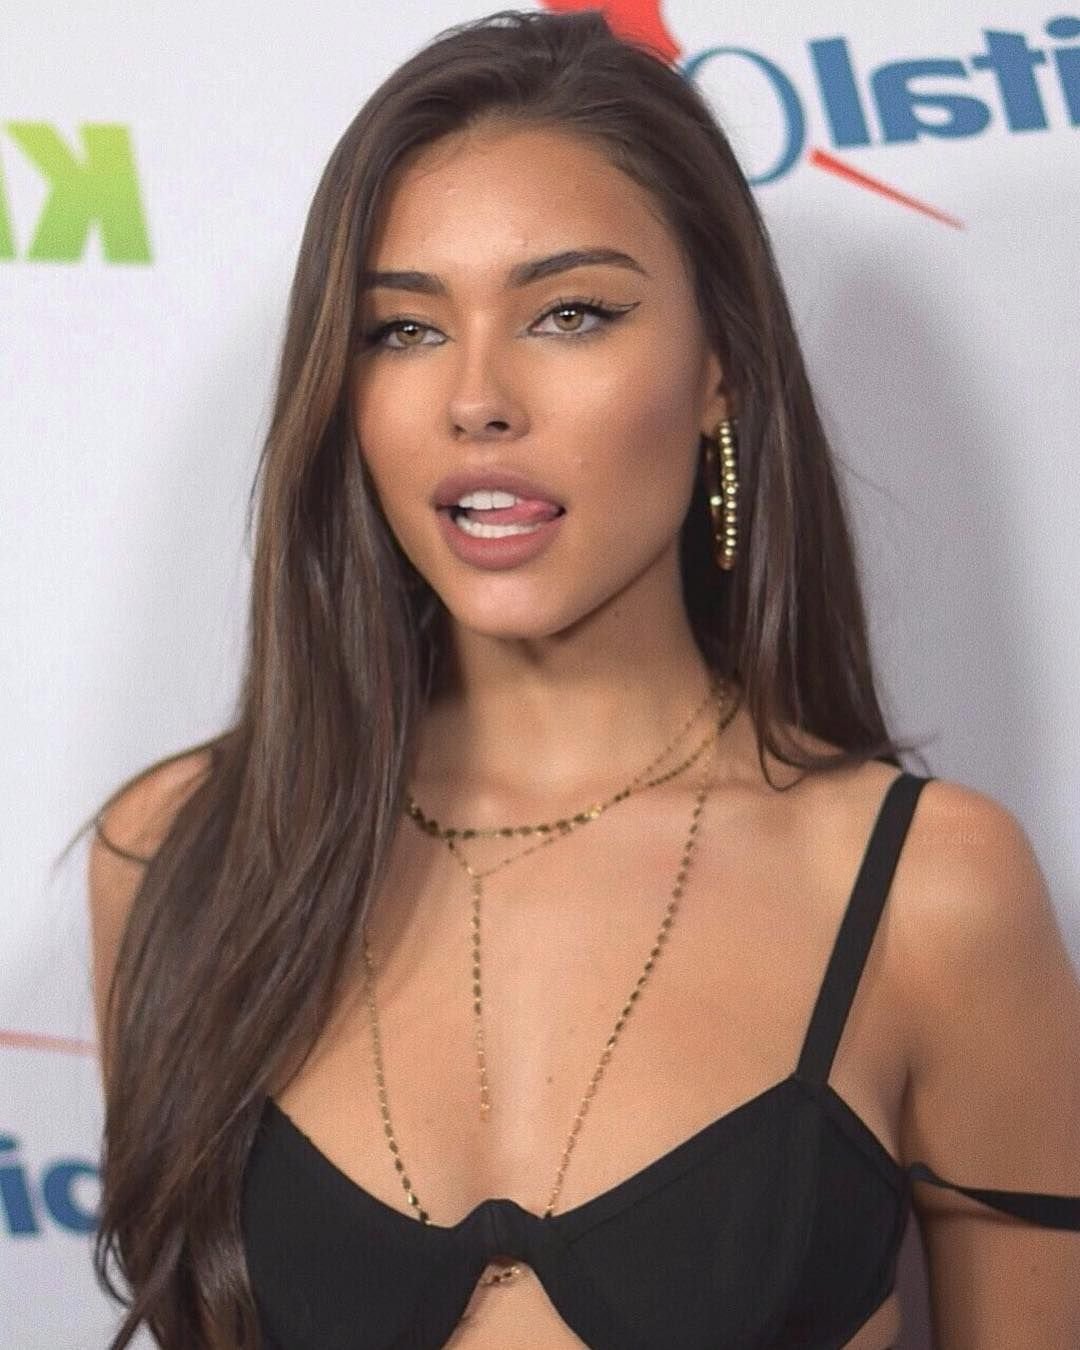 Madison beer mouth